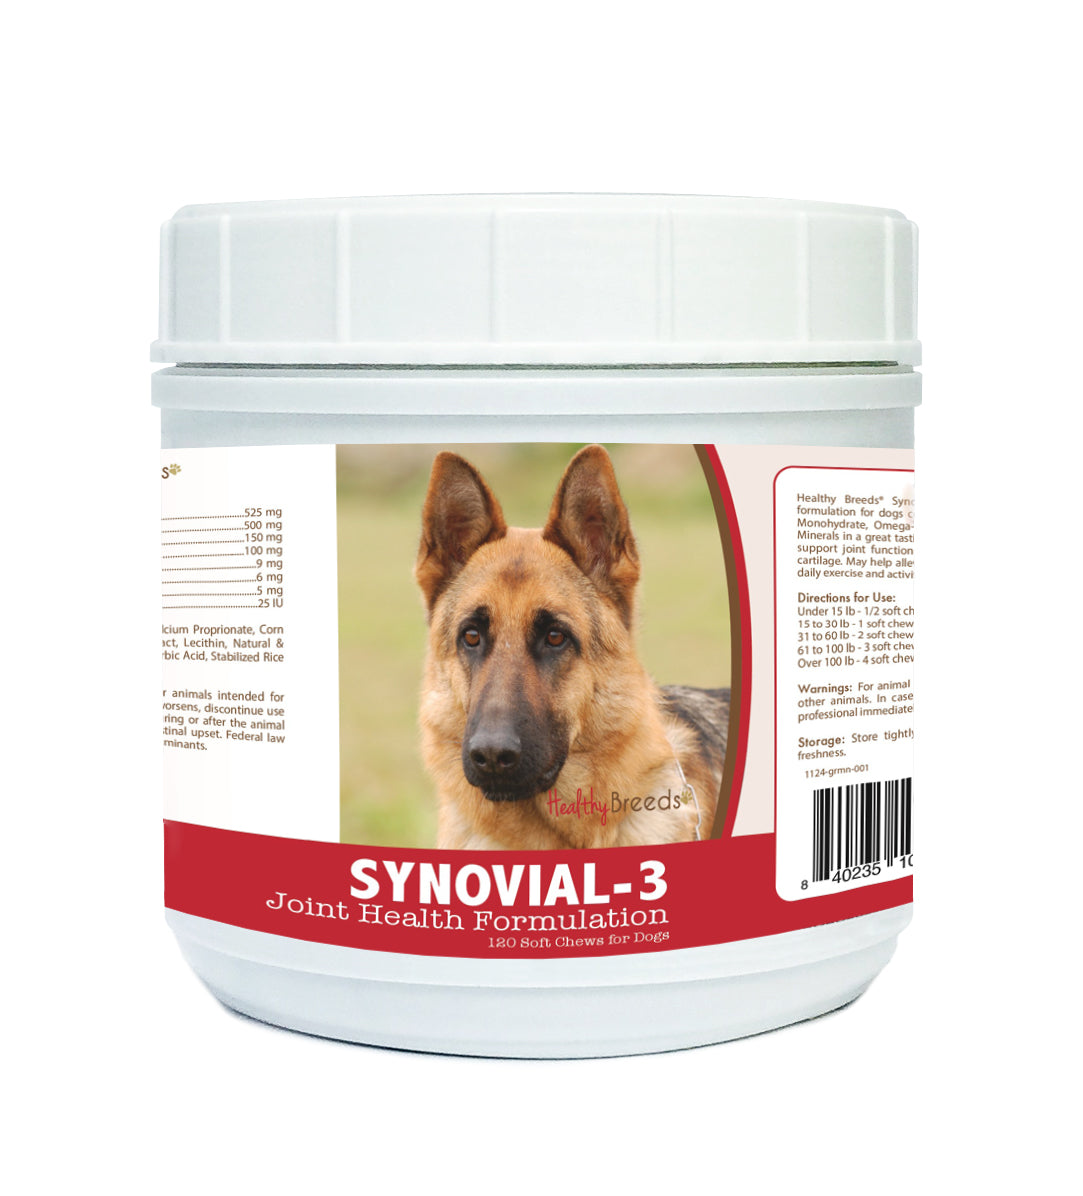 German Shepherd Synovial-3 Joint Health Formulation Soft Chews 120 Count